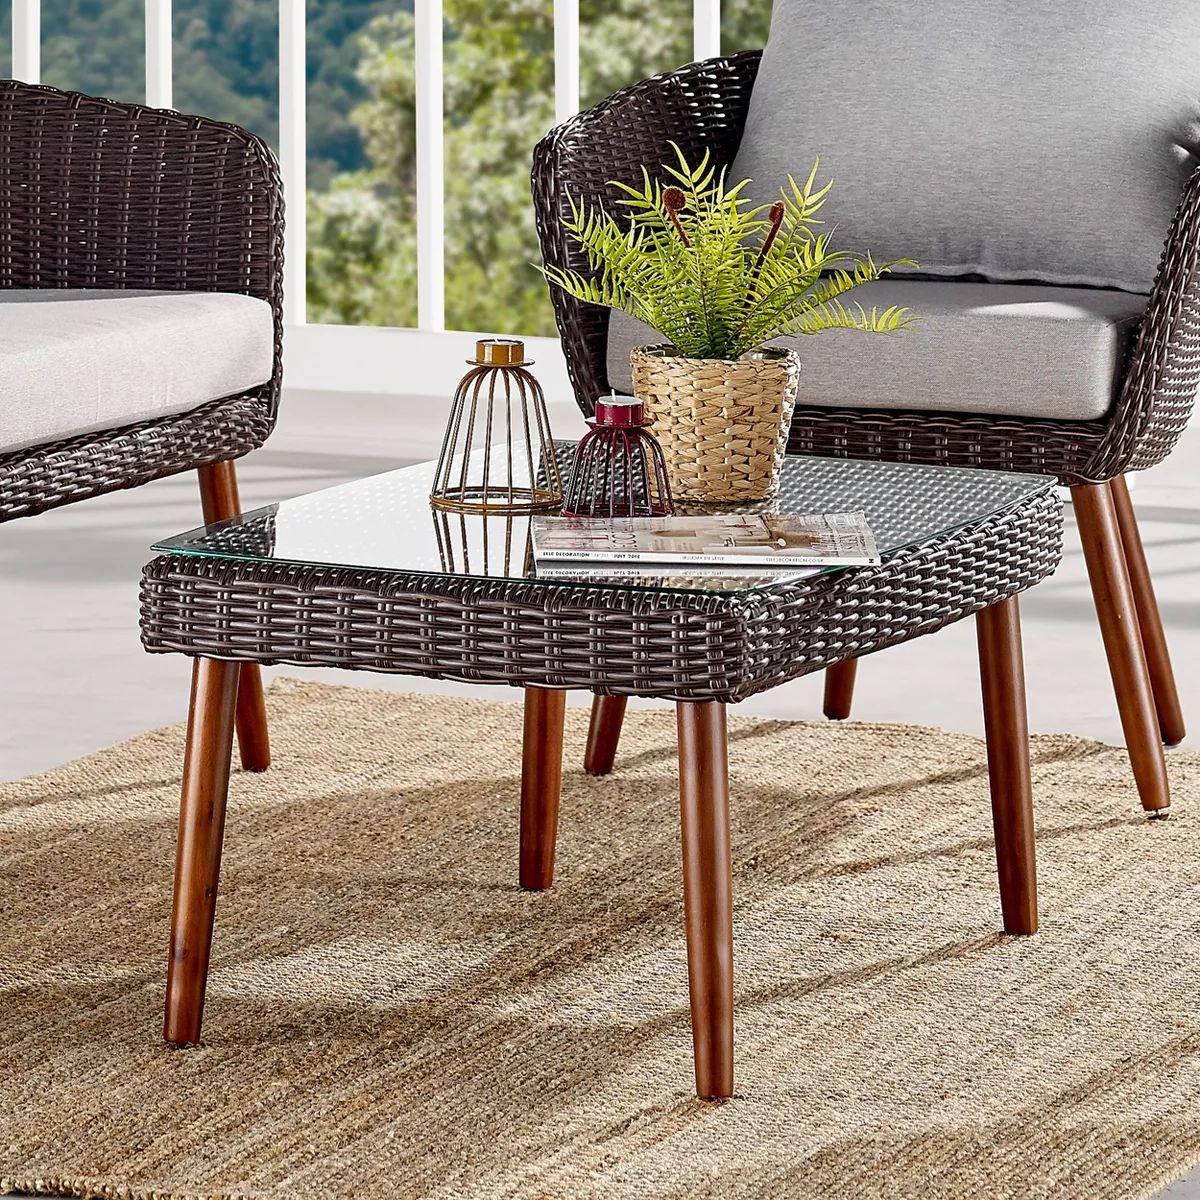 All-Weather Wicker Athens Outdoor Coffee Table with Glass Top Brown - Alaterre Furniture | Target